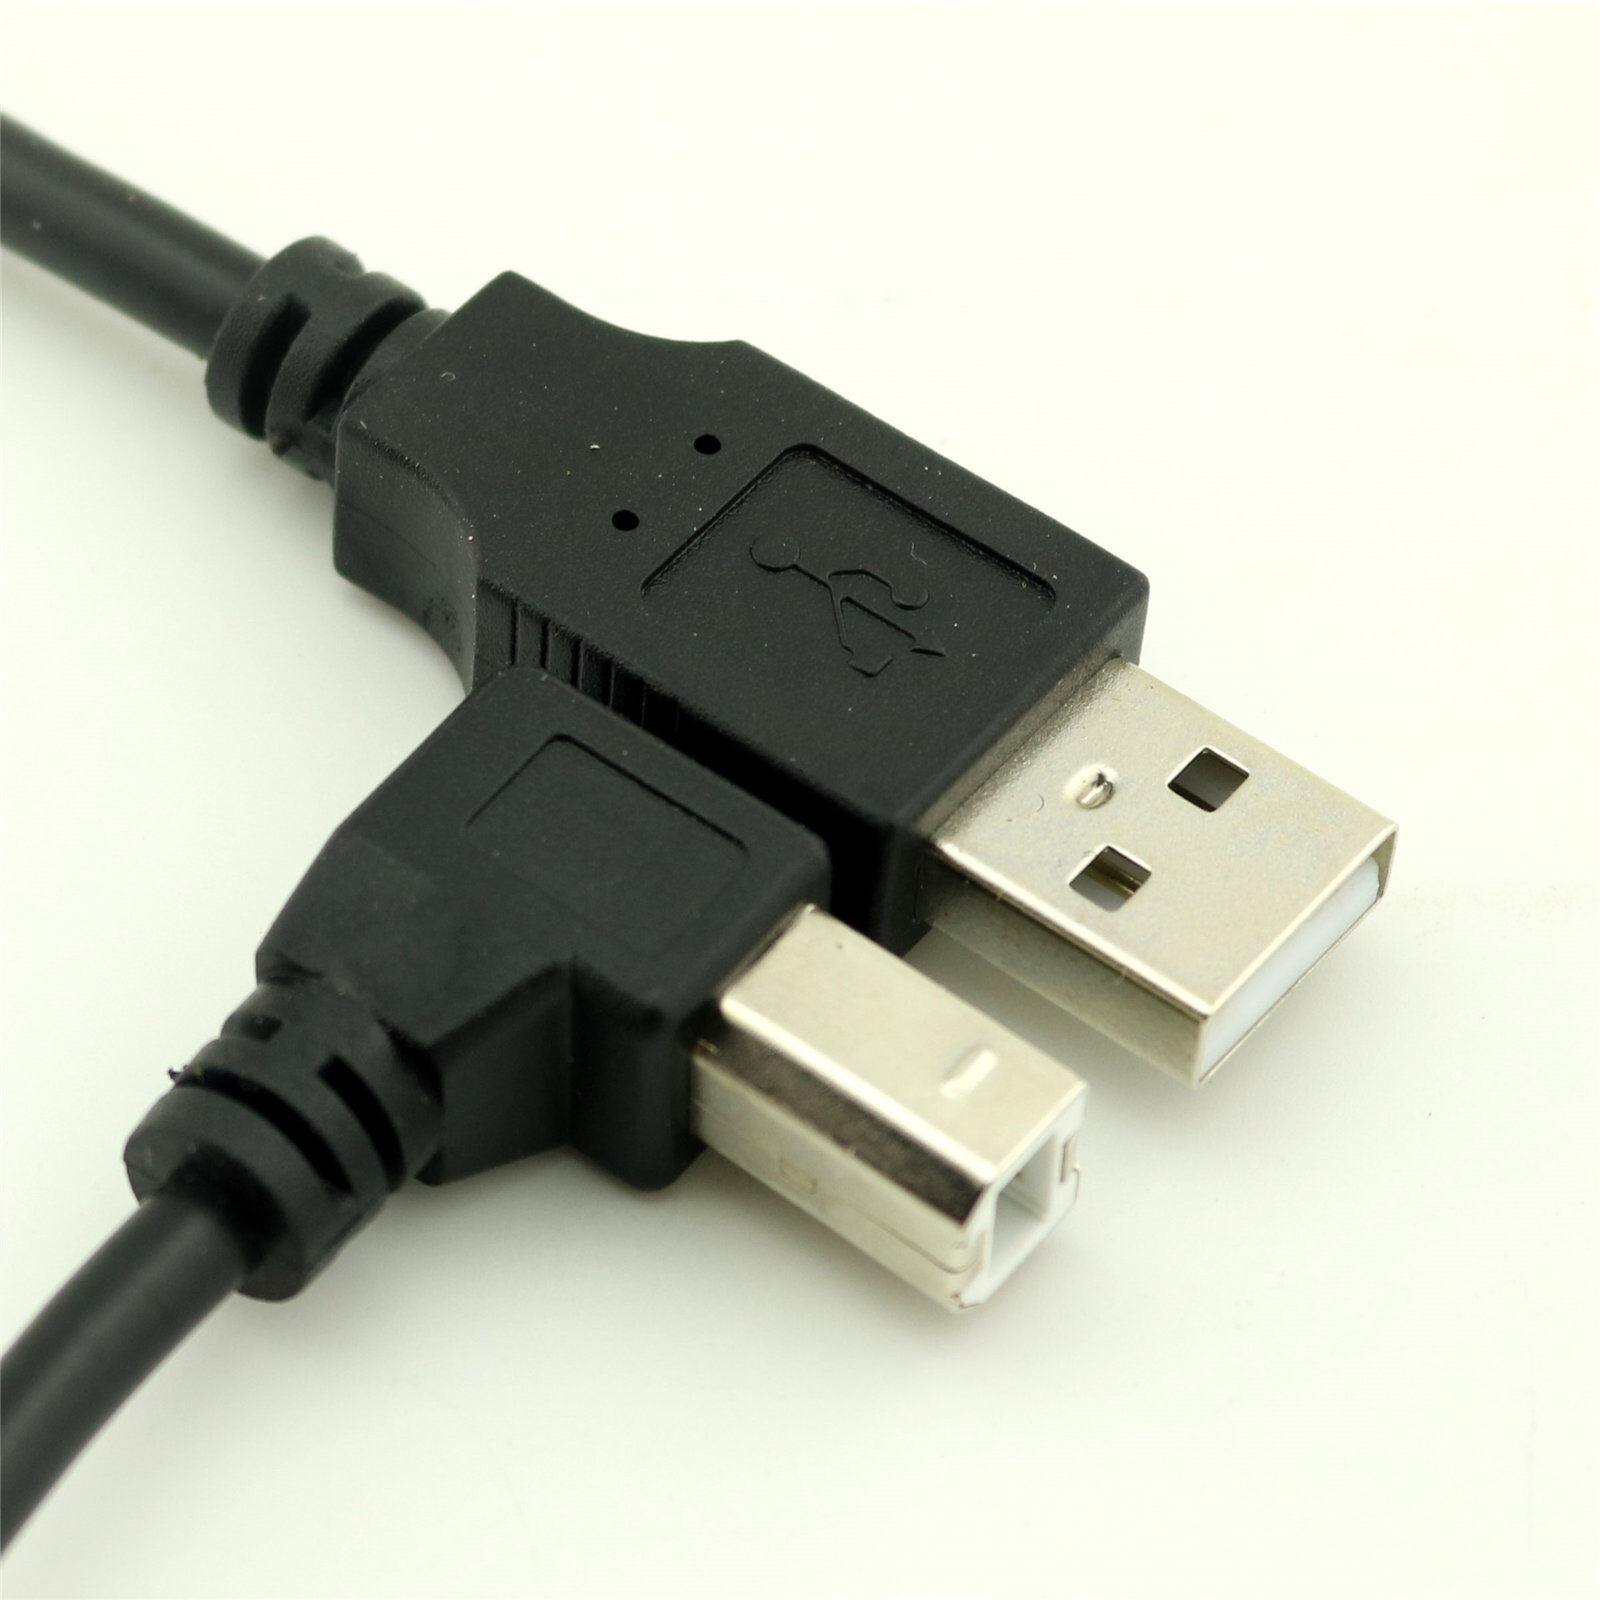 USB 2.0 A Male to B Male Cable Down Angled 90 Degree for Printer Hard Disk 30cm